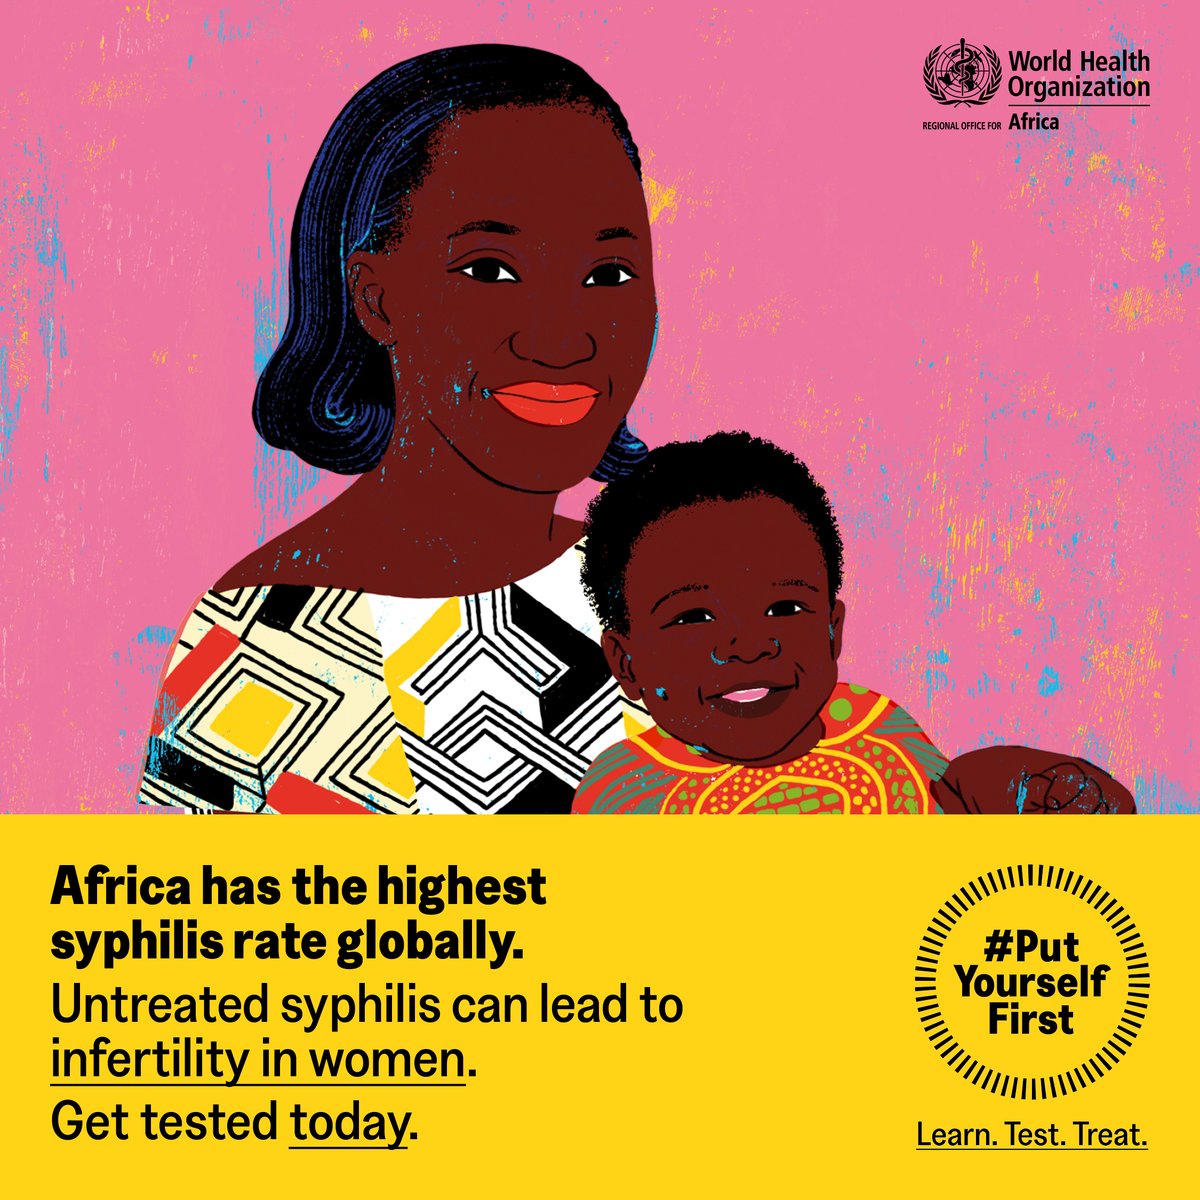 #Syphilis is a bacterial infection transmitted through sexual contact or from mother to child during pregnancy or postpartum. If left untreated, it can lead to life-threatening problems. Get tested today 👩🏿‍⚕️ afro.who.int/PutYourselfFir…